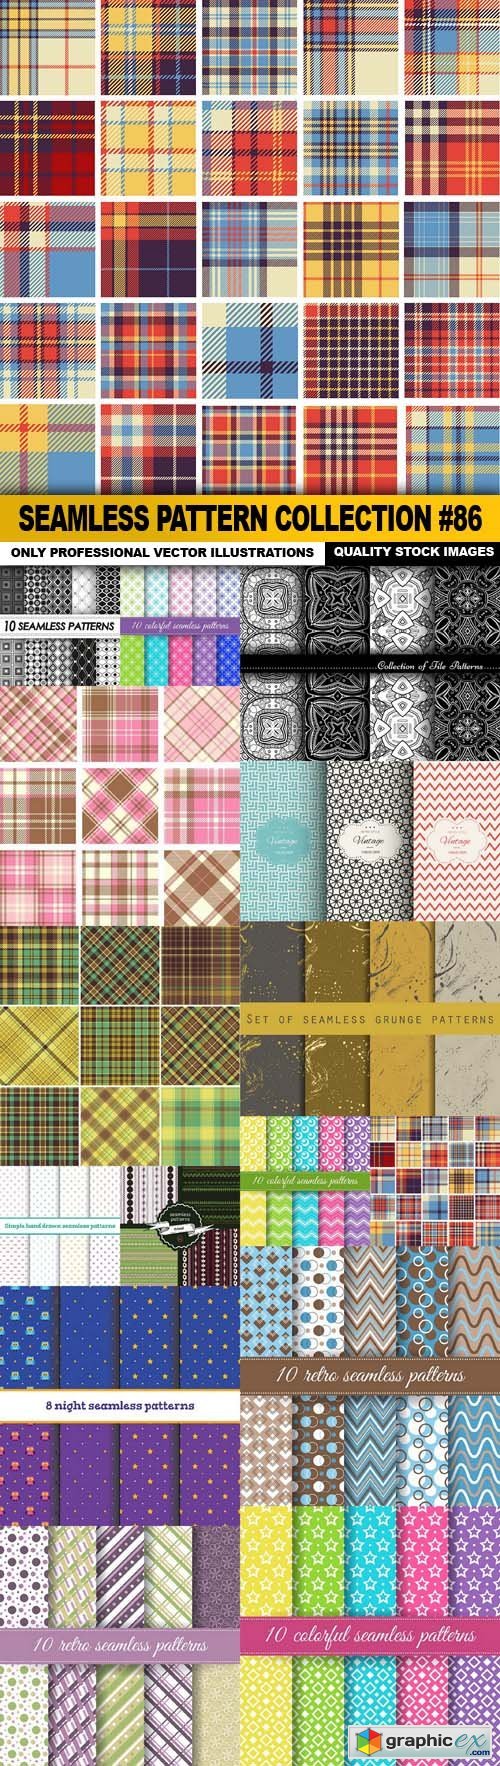 Seamless Pattern Collection #86 - 15 Vector